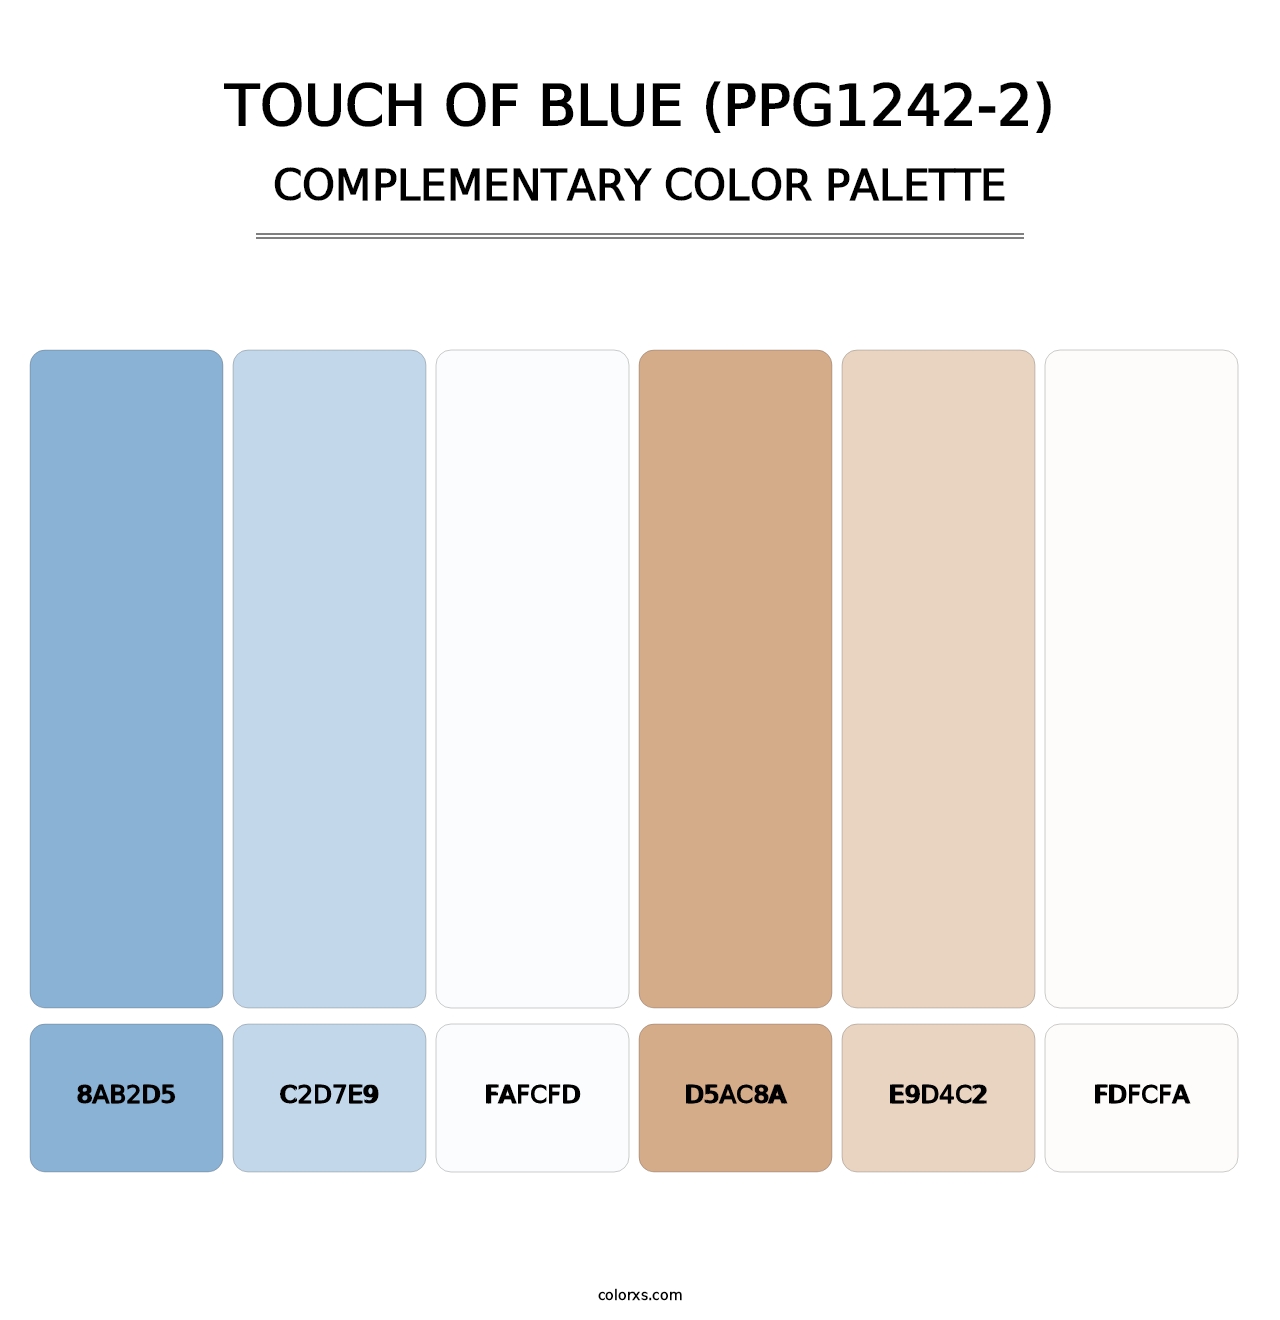 Touch Of Blue (PPG1242-2) - Complementary Color Palette